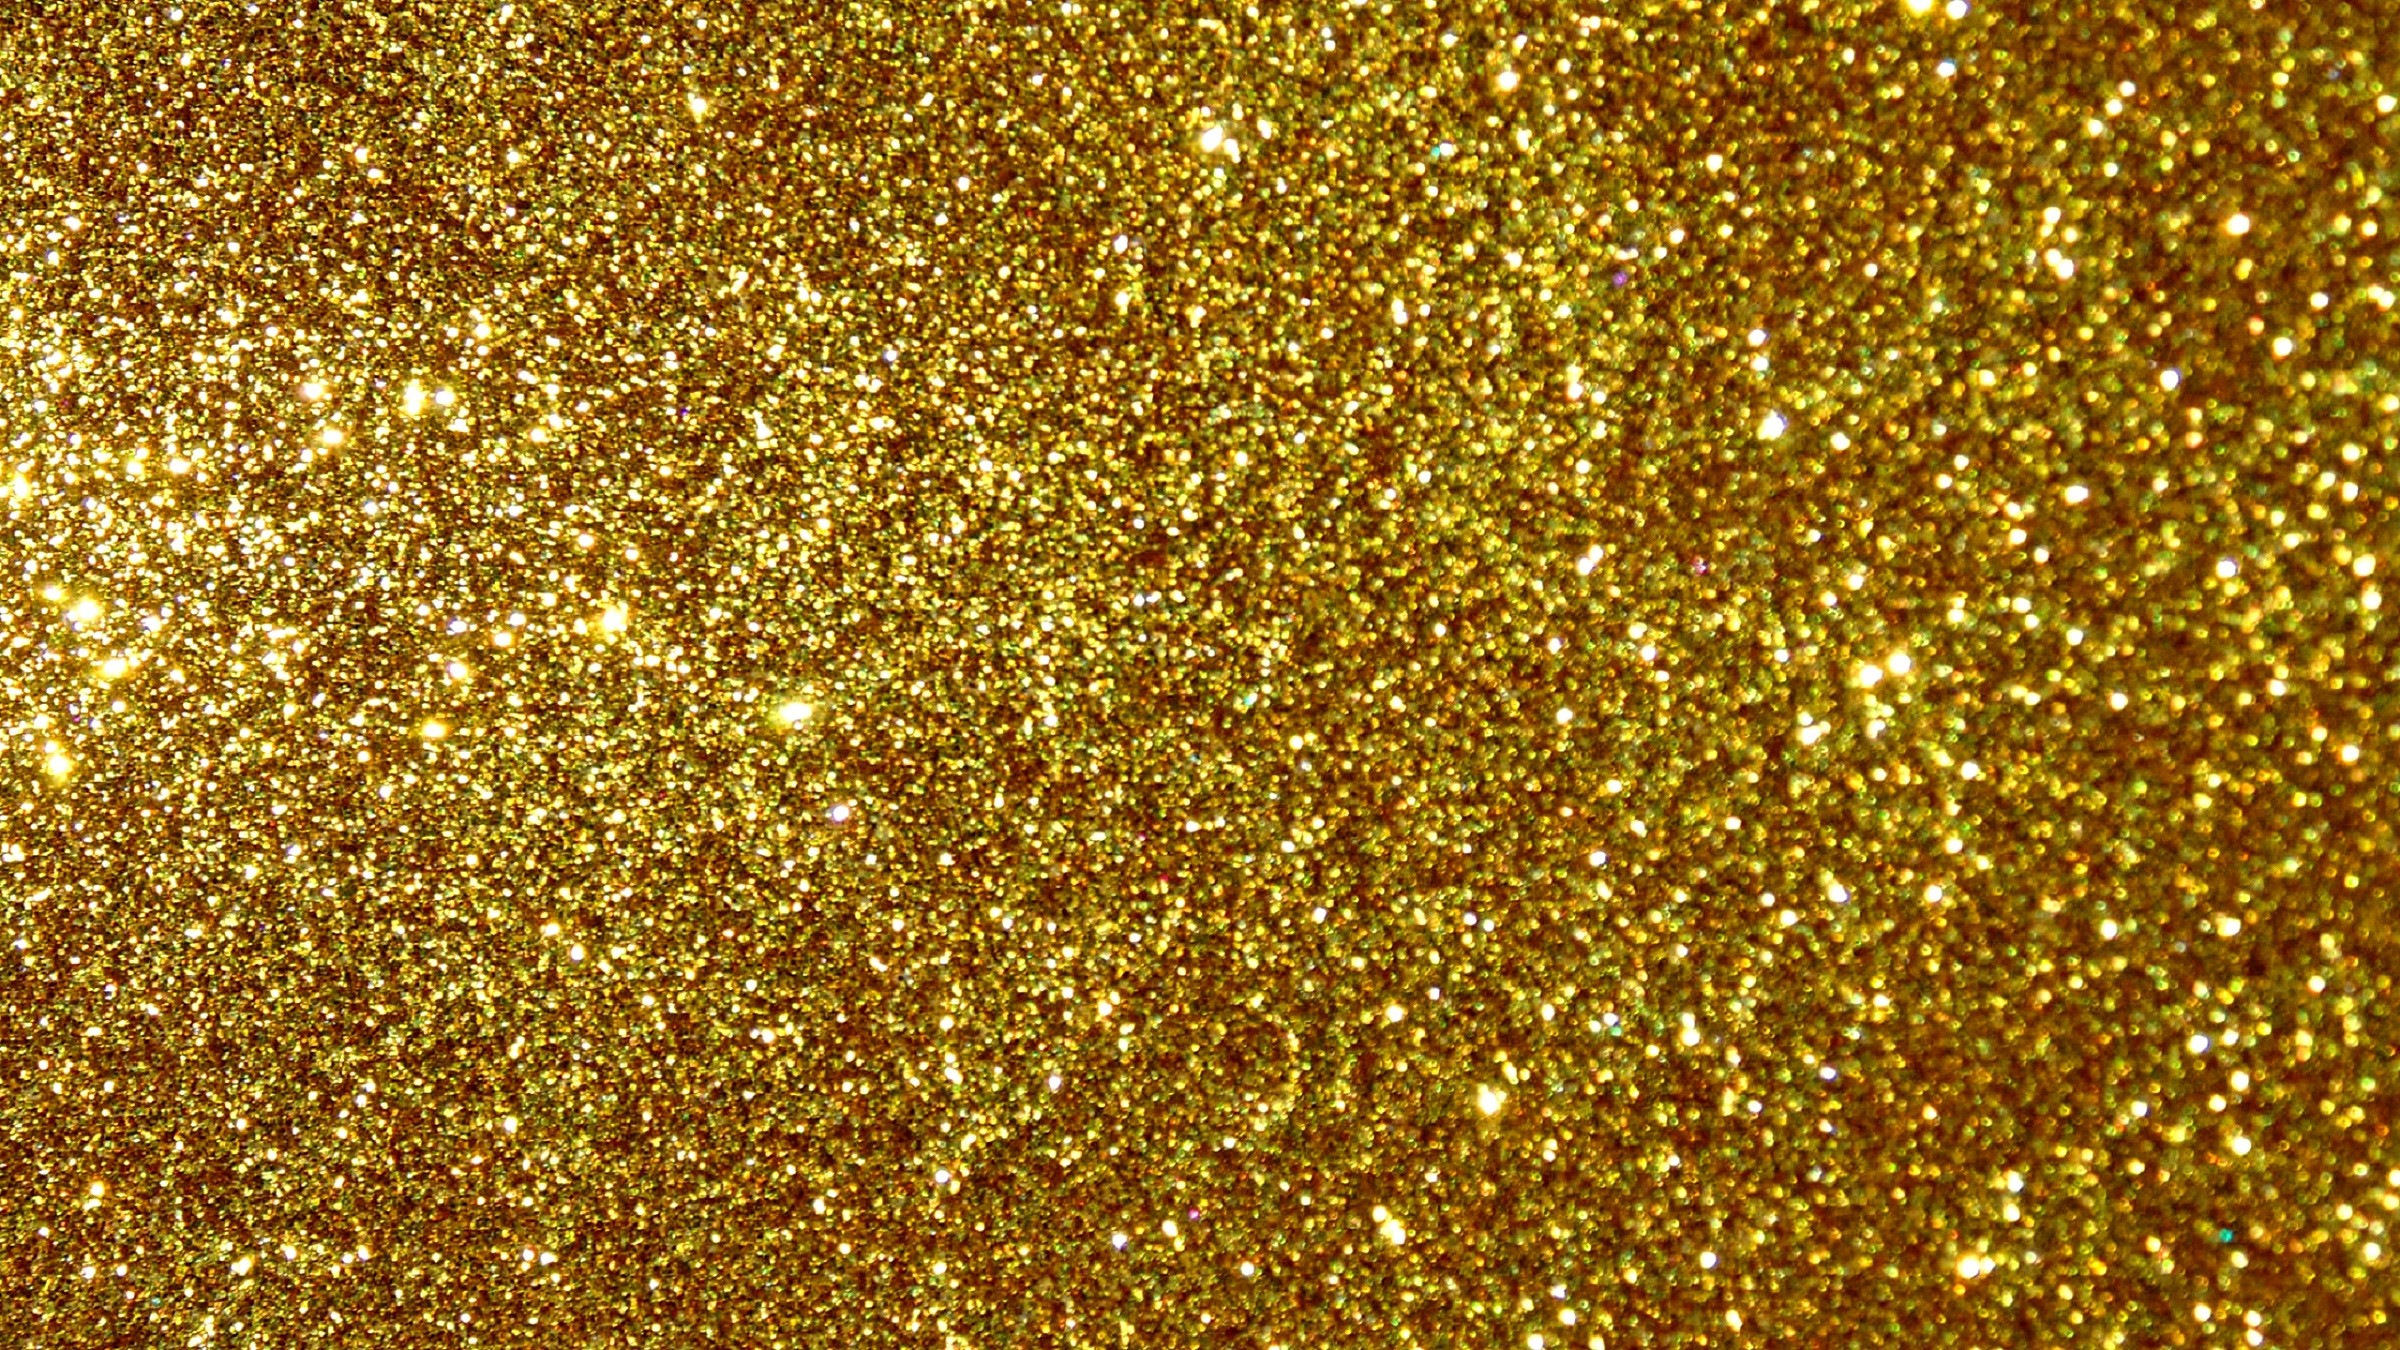 Glitter and colors's HD Wallpaper